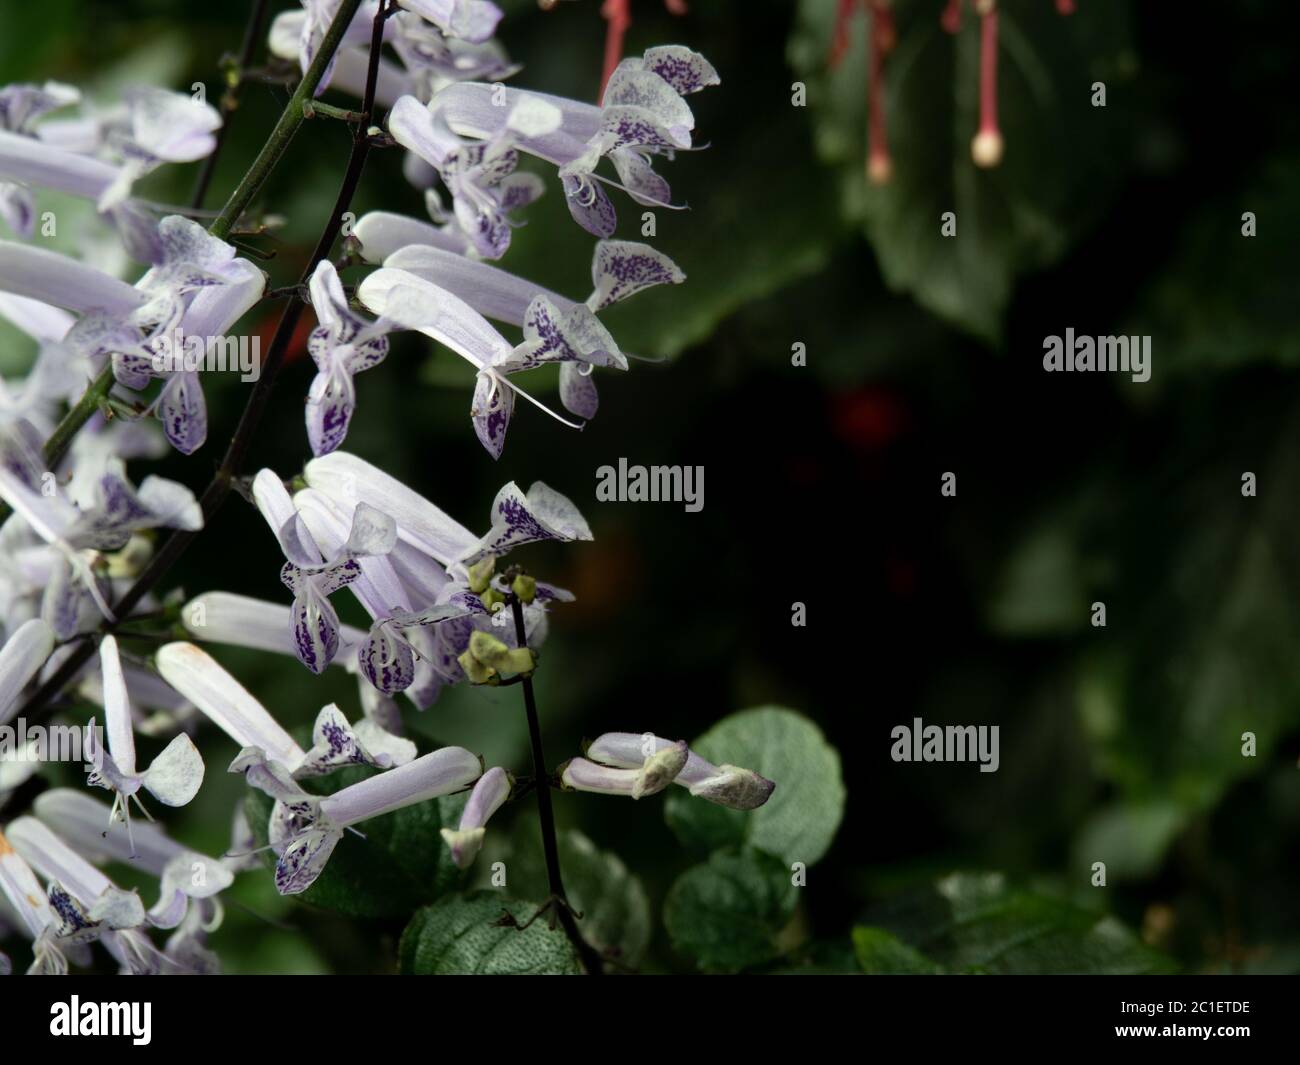 Plectranthus 'Mona Lavender' flowers, other names, Lavender spur flower, Swedish ivy, Mona Lavender . Pale lavender color flowers dashed with dark pur. Stock Photo